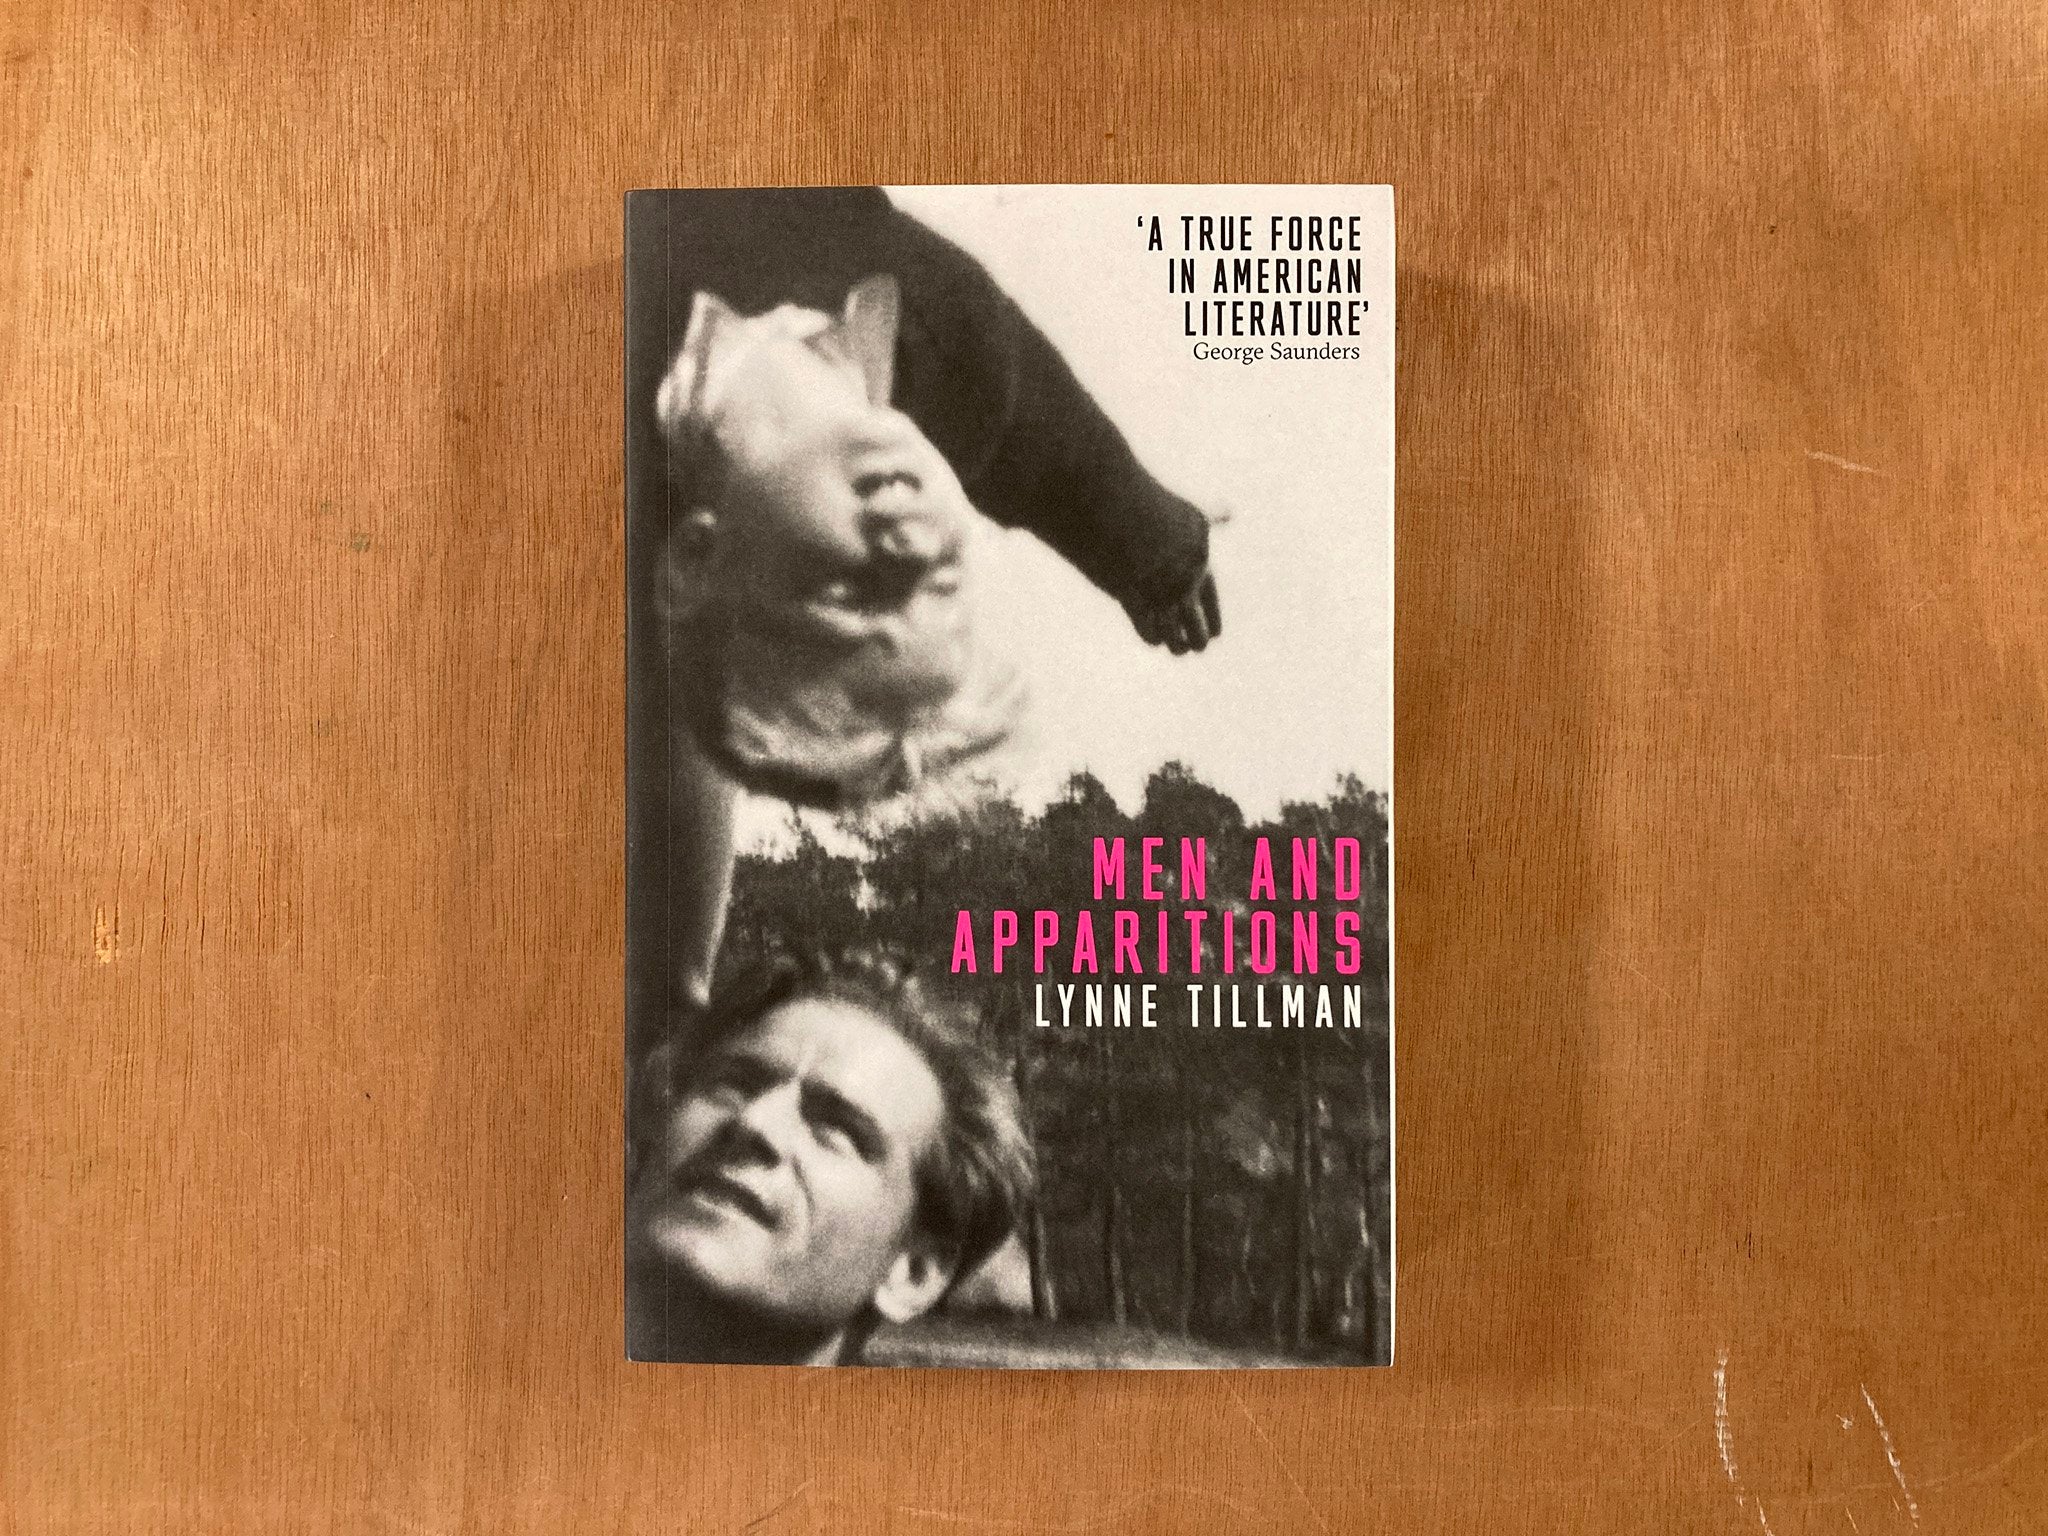 MEN AND APPARITIONS by Lynne Tillman